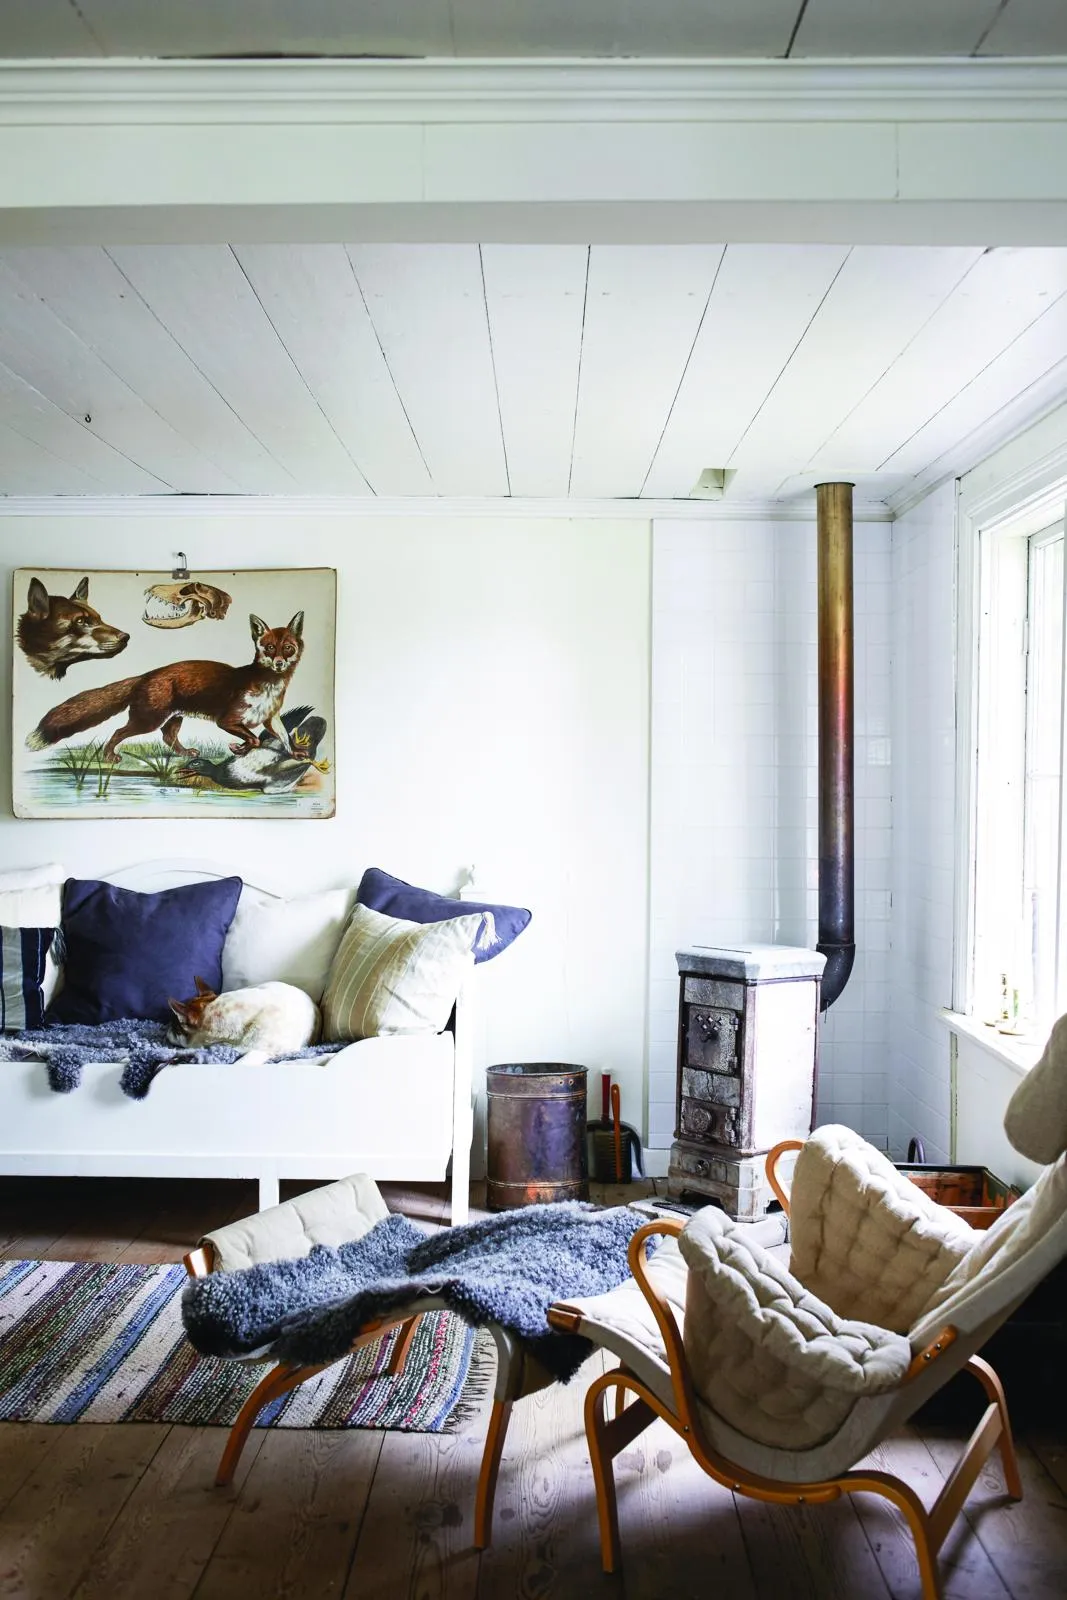 An antiques-filled lake house in Sweden